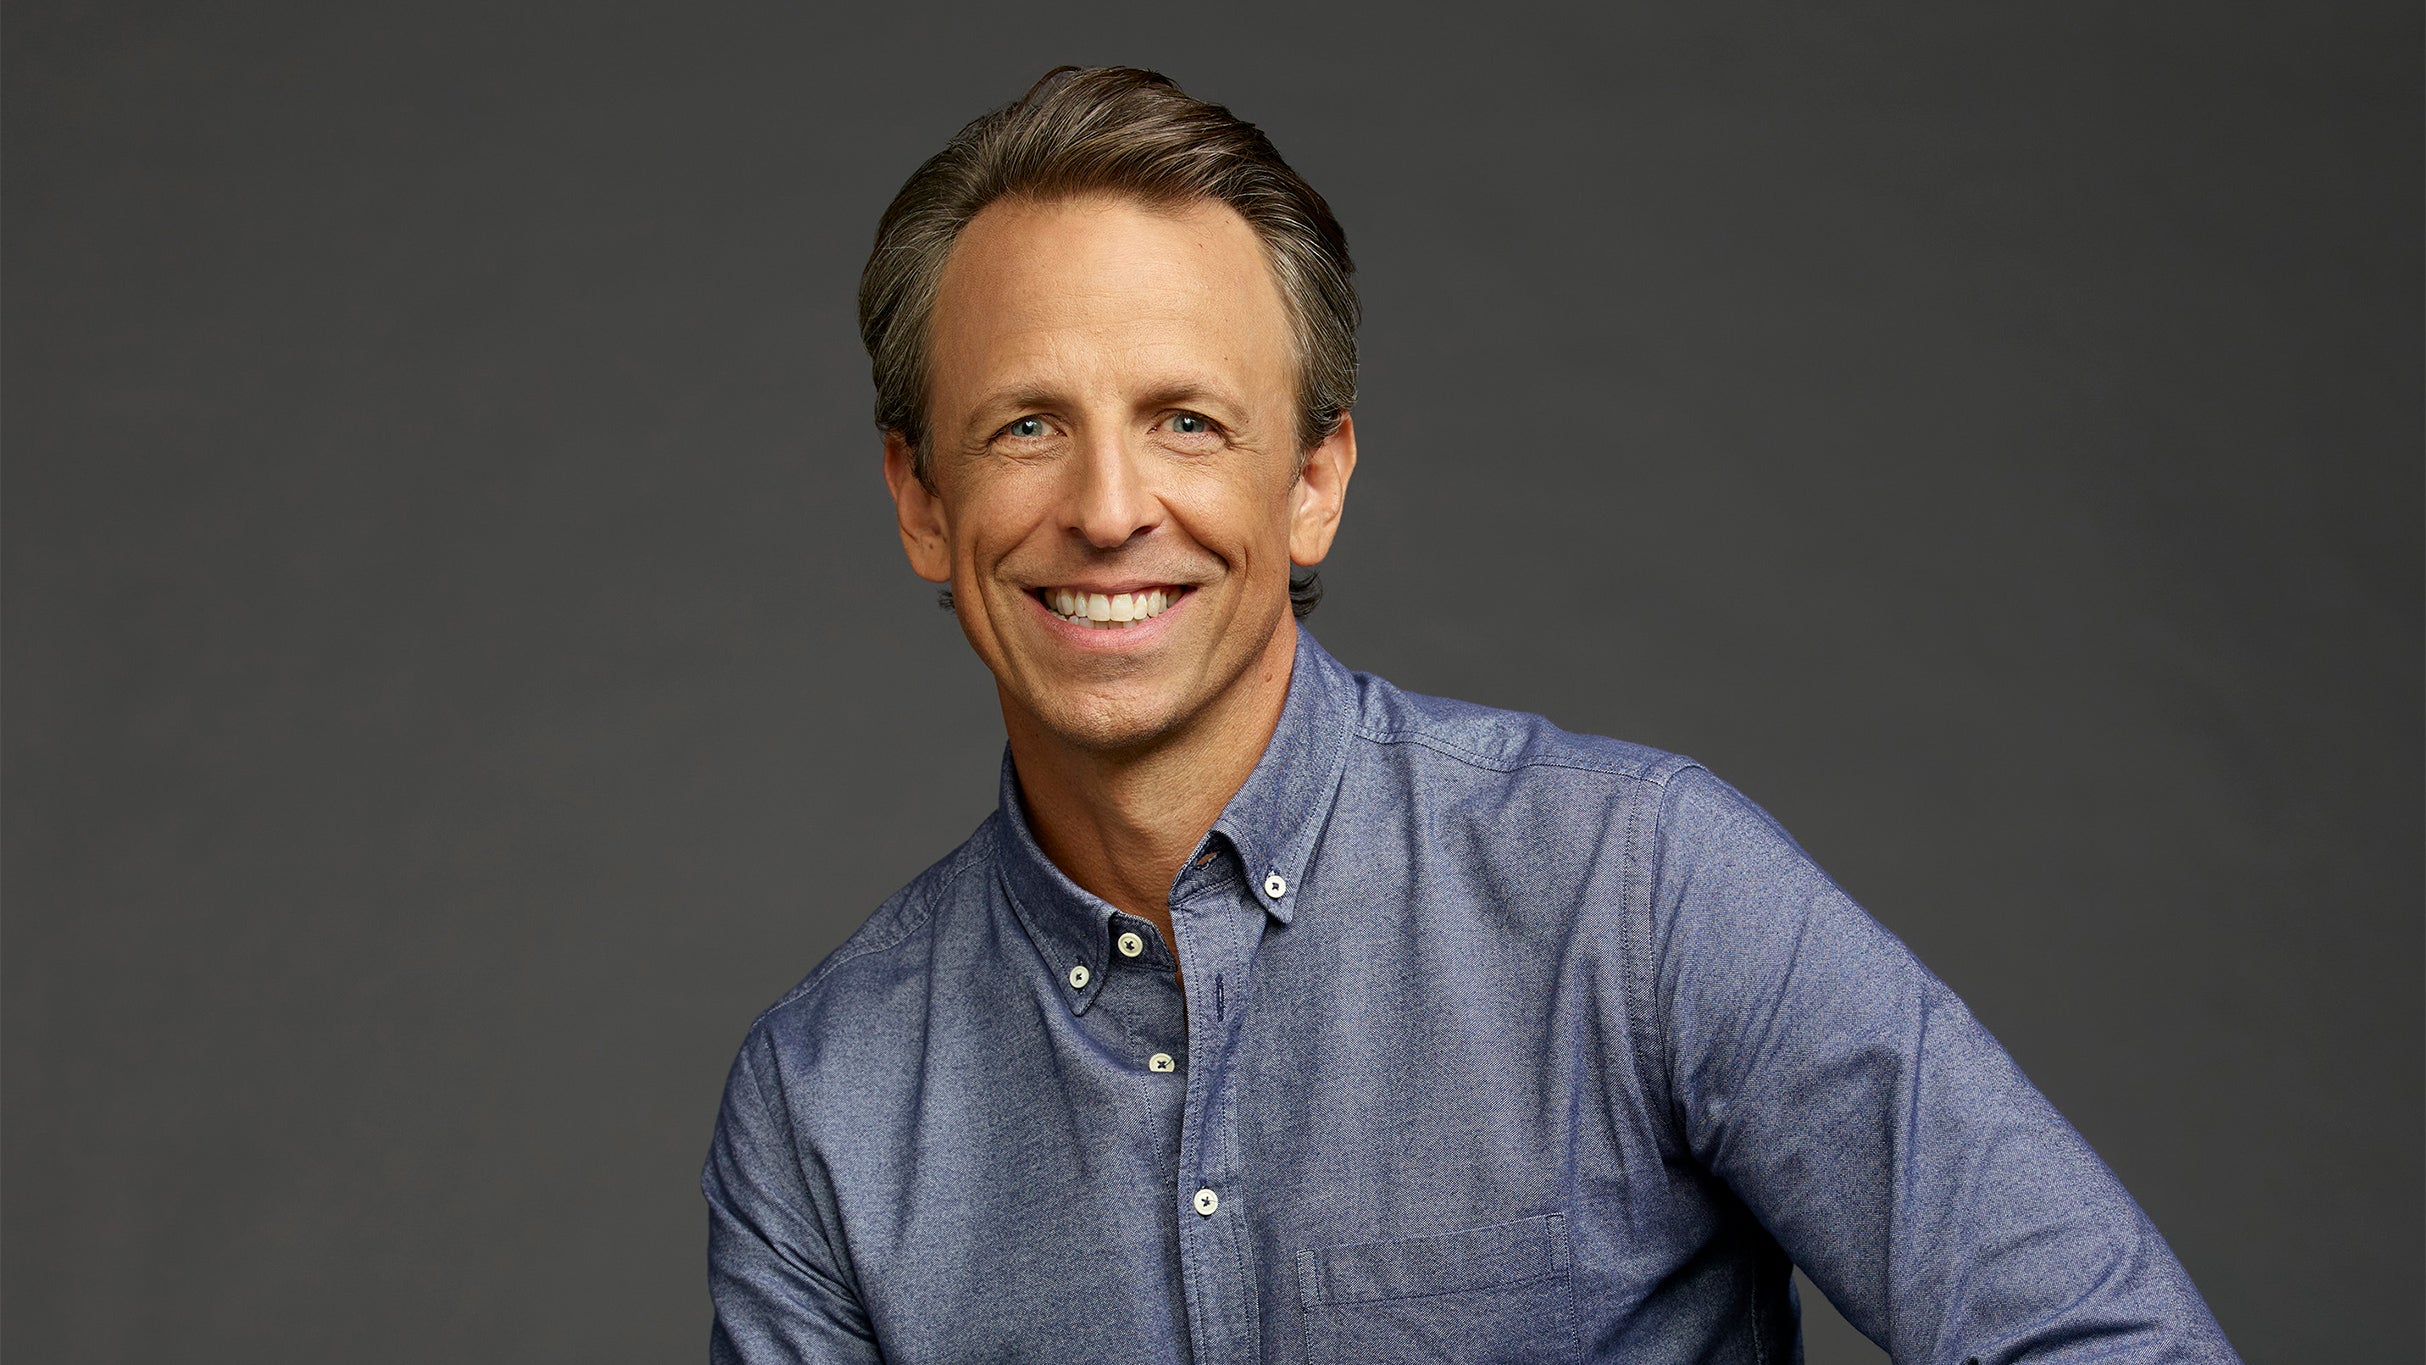 Seth Meyers free pre-sale listing for show tickets in Tampa, FL (Seminole Hard Rock Tampa Event Center)